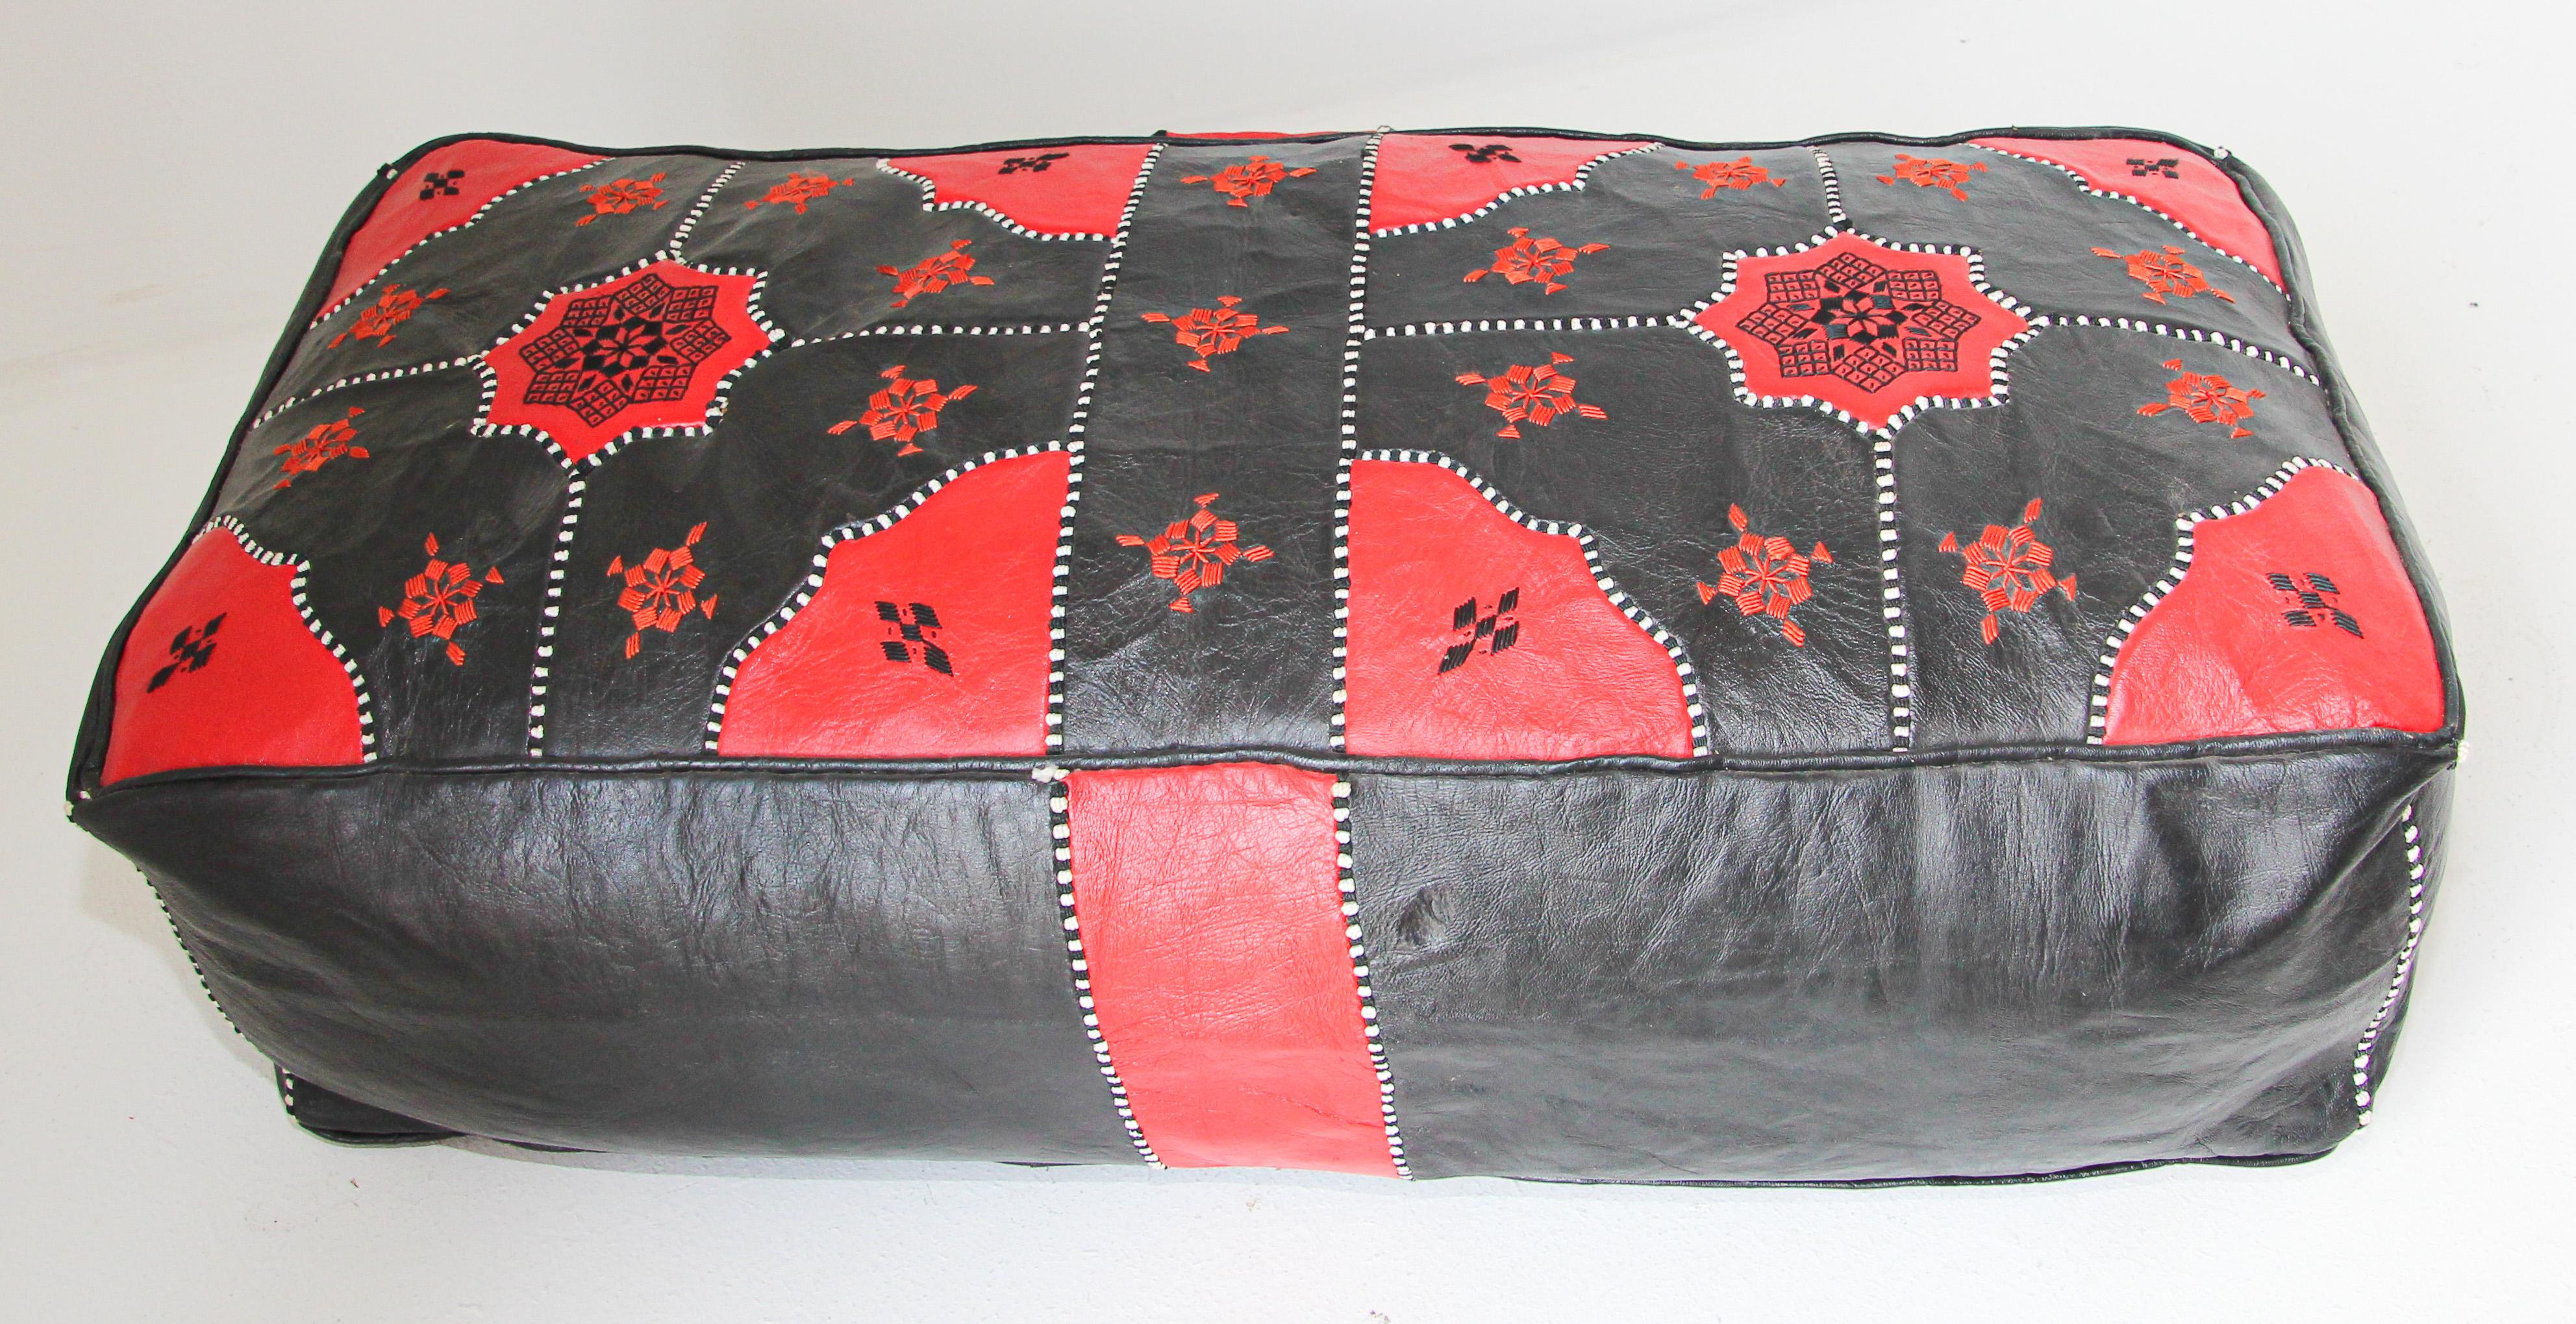 Vintage Moroccan Leather Rectangular Pouf in Red and Black For Sale 10